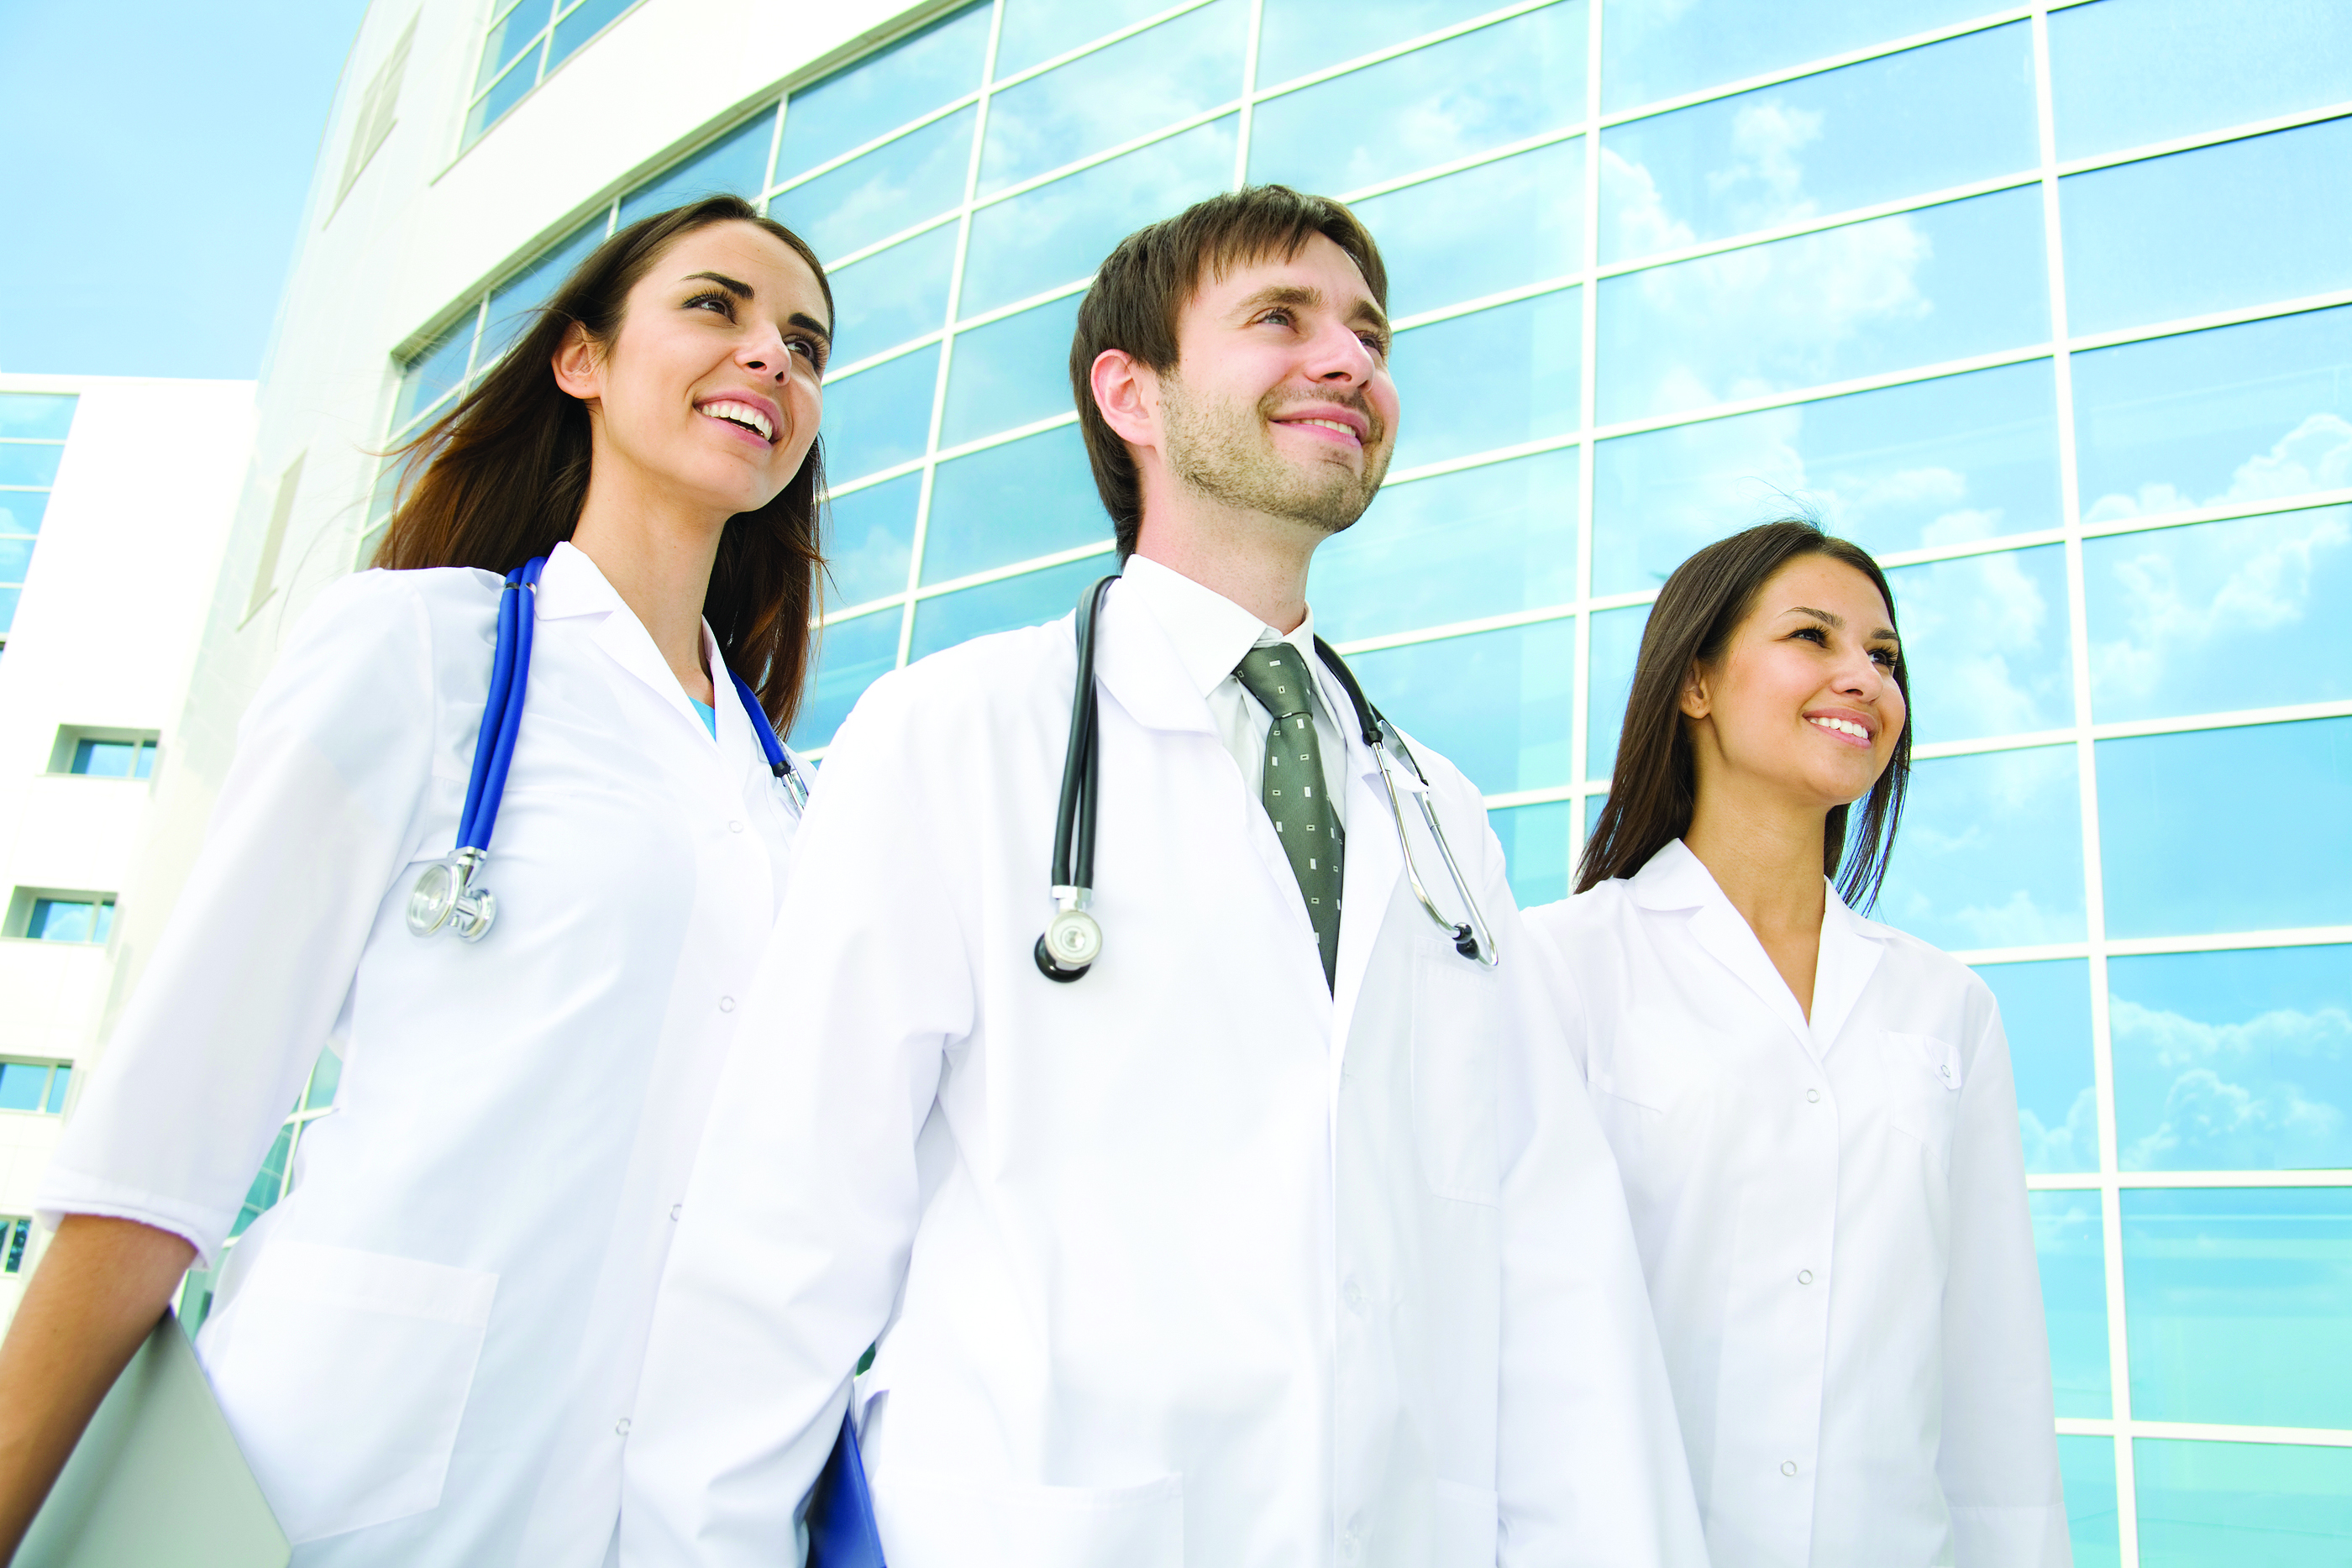 bigstock-Group-of-happy-young-doctors-g-16972040